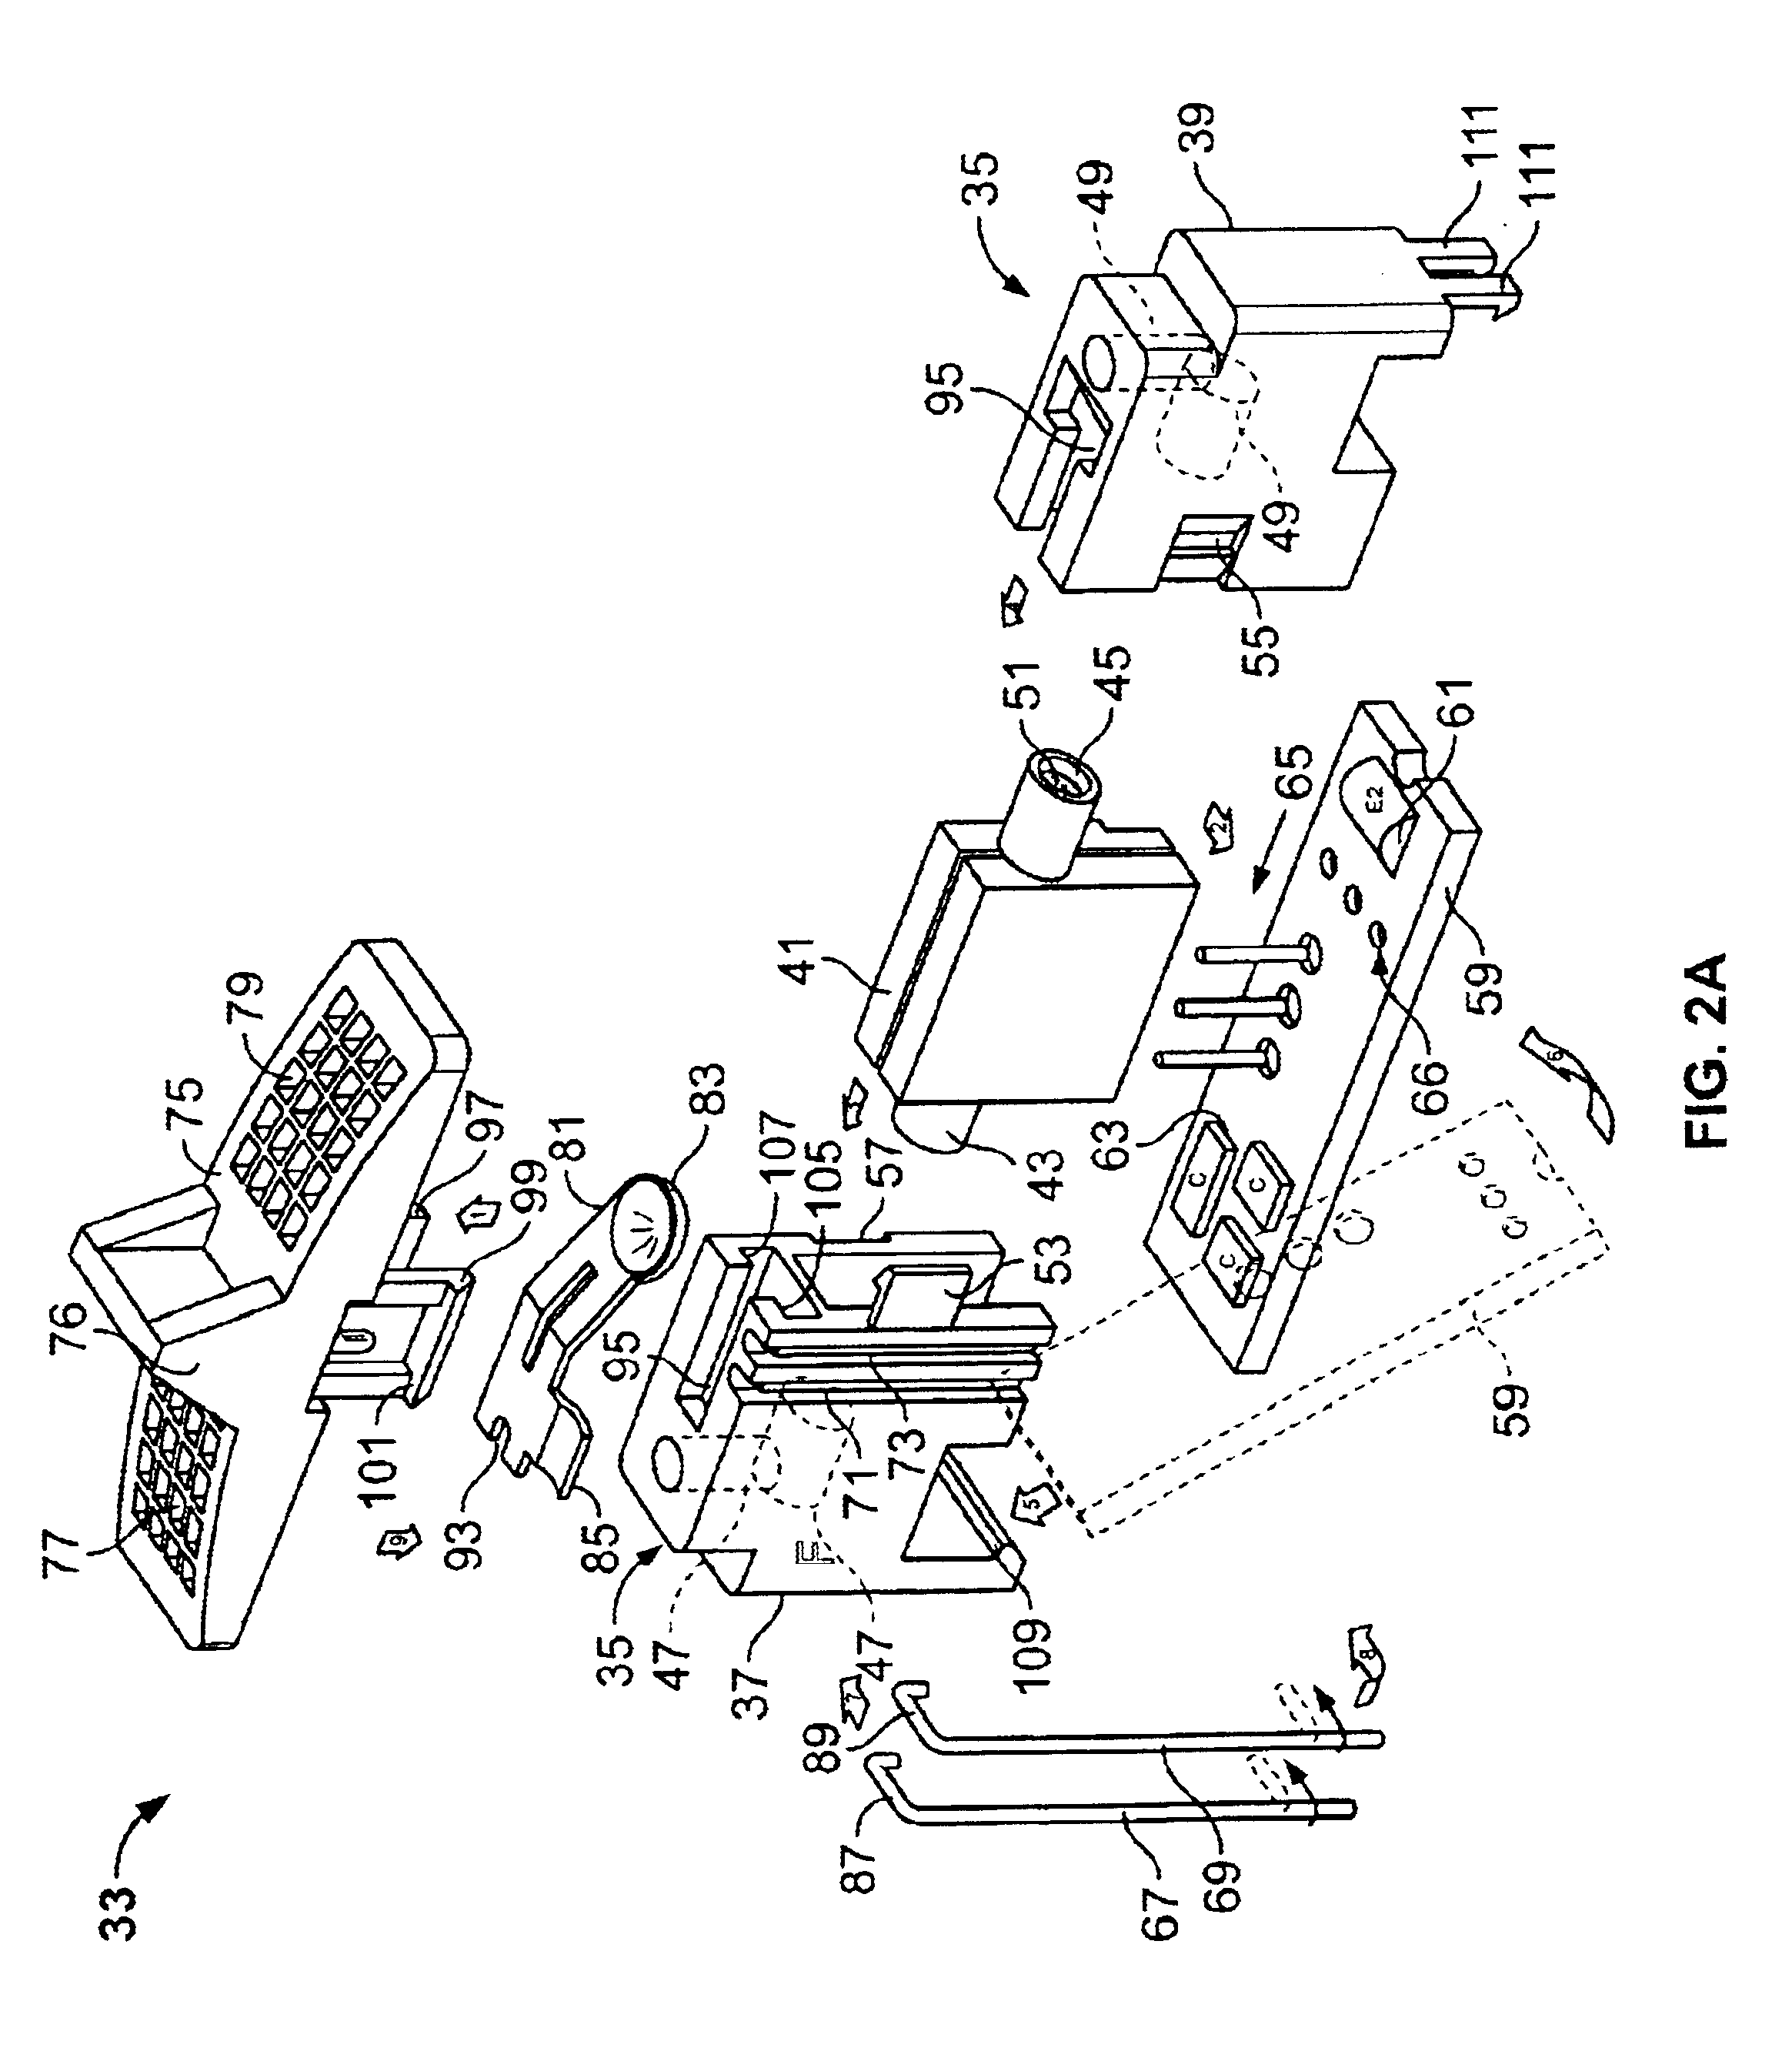 Microphone for hearing aid and communications applications having switchable polar and frequency response characteristics